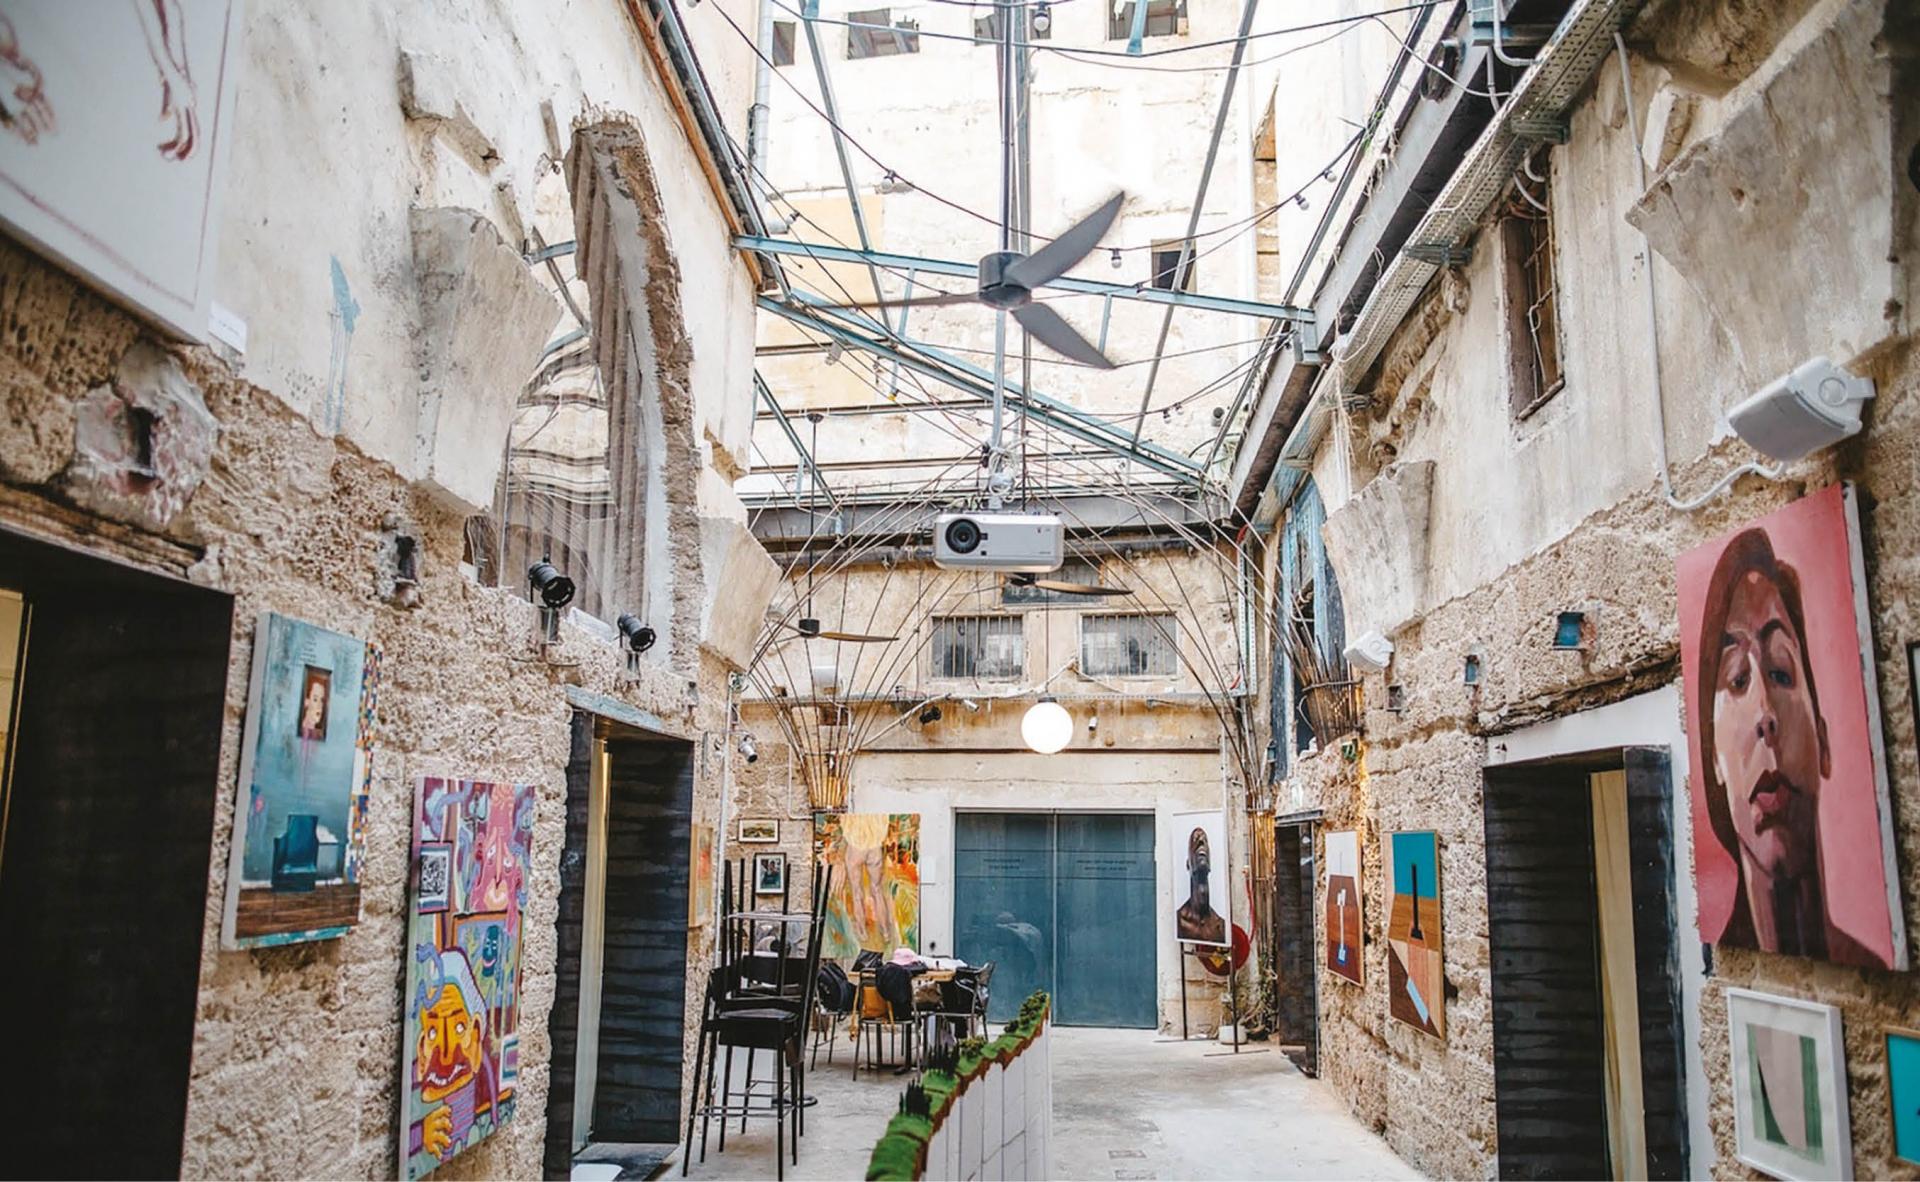 We Take You to Explore Tel Aviv, a Beguiling City by the Sea